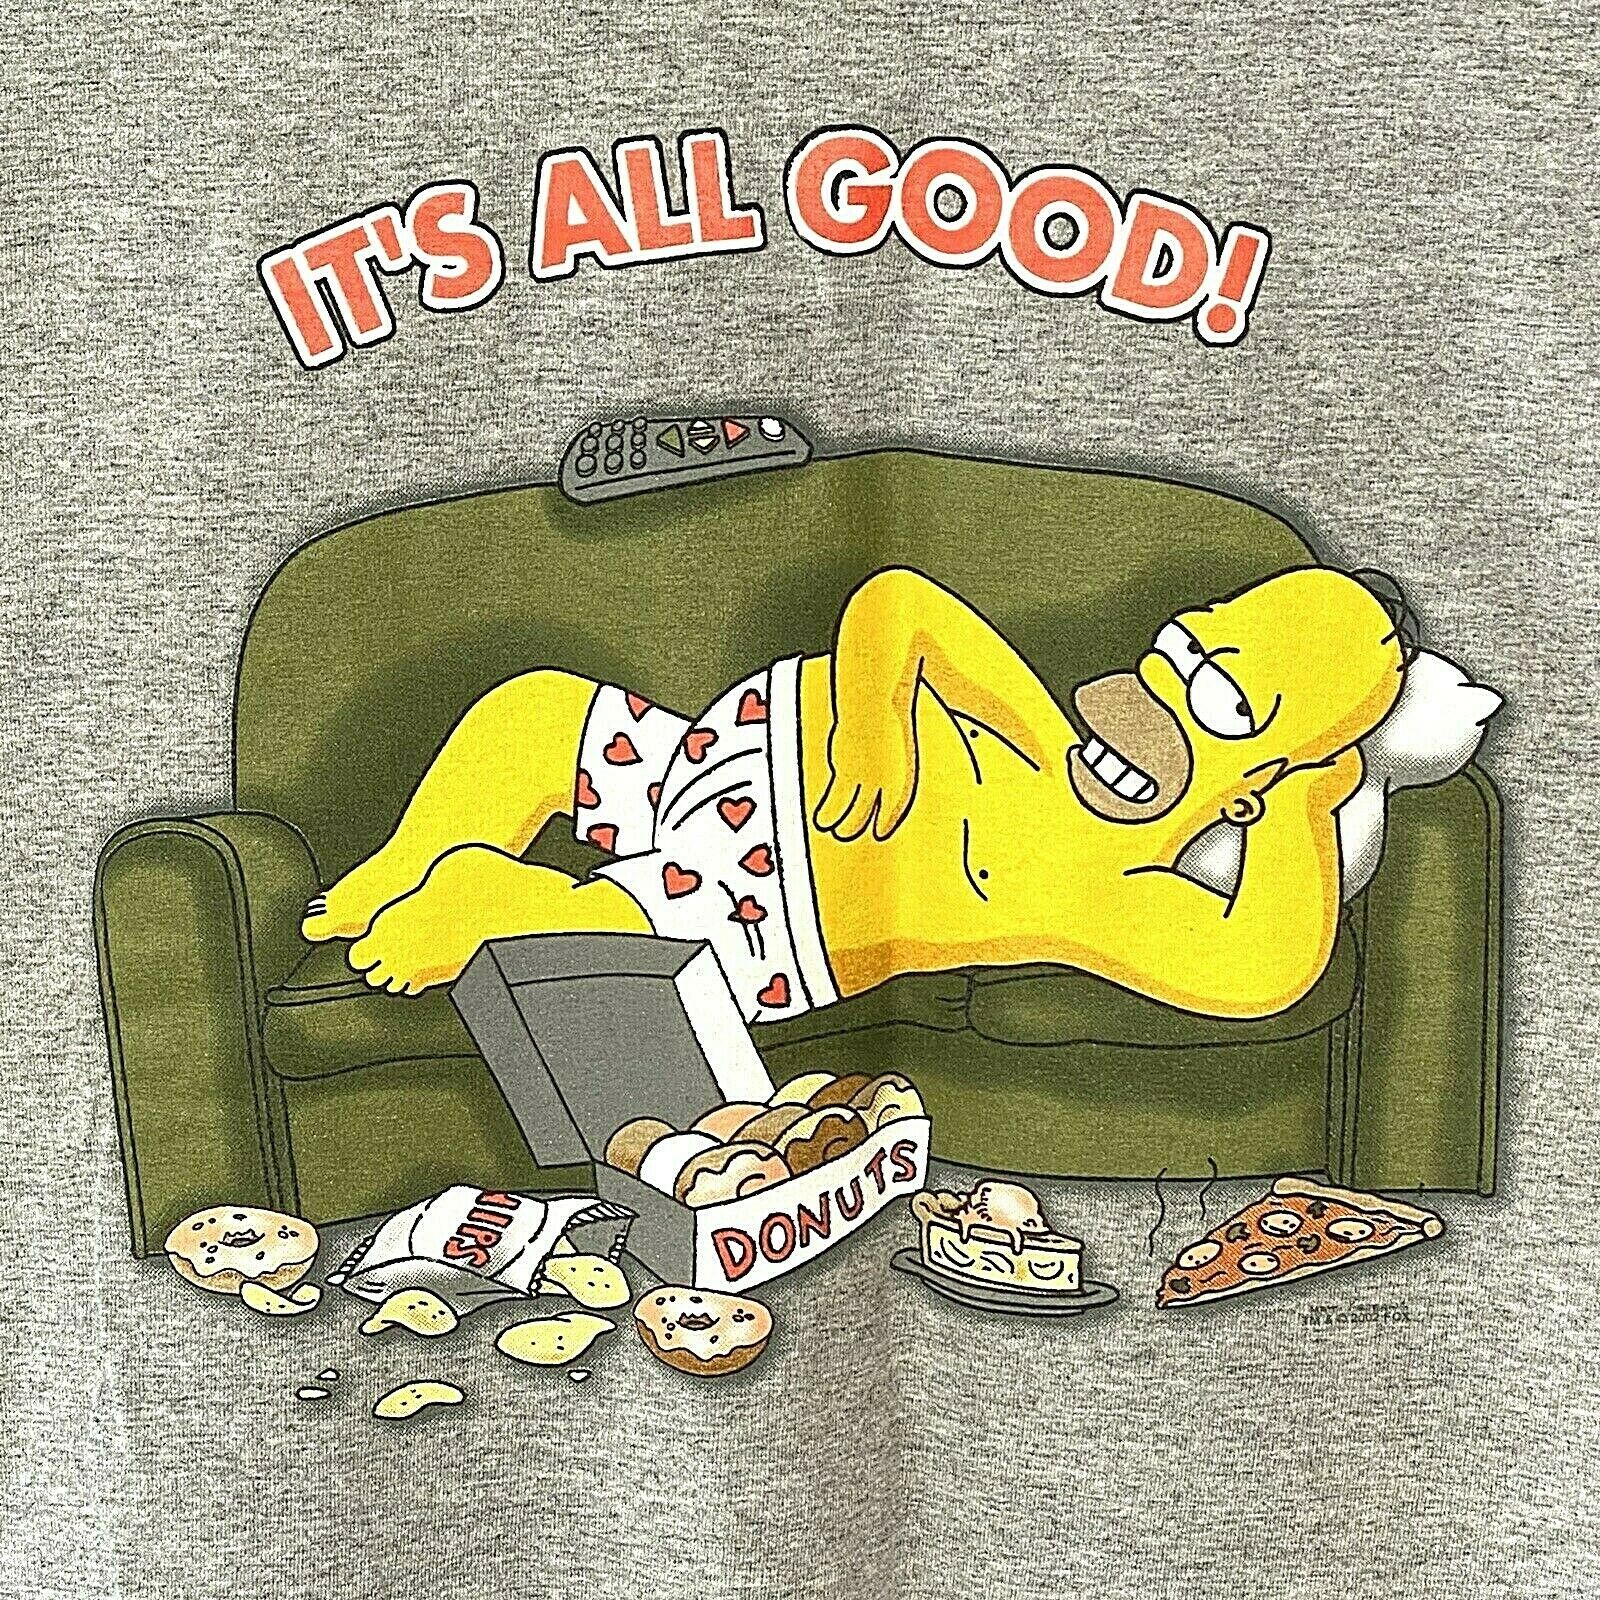 The Simpsons It’s All Good Donuts Homer Simpson 2002 T Shirt Gray Large